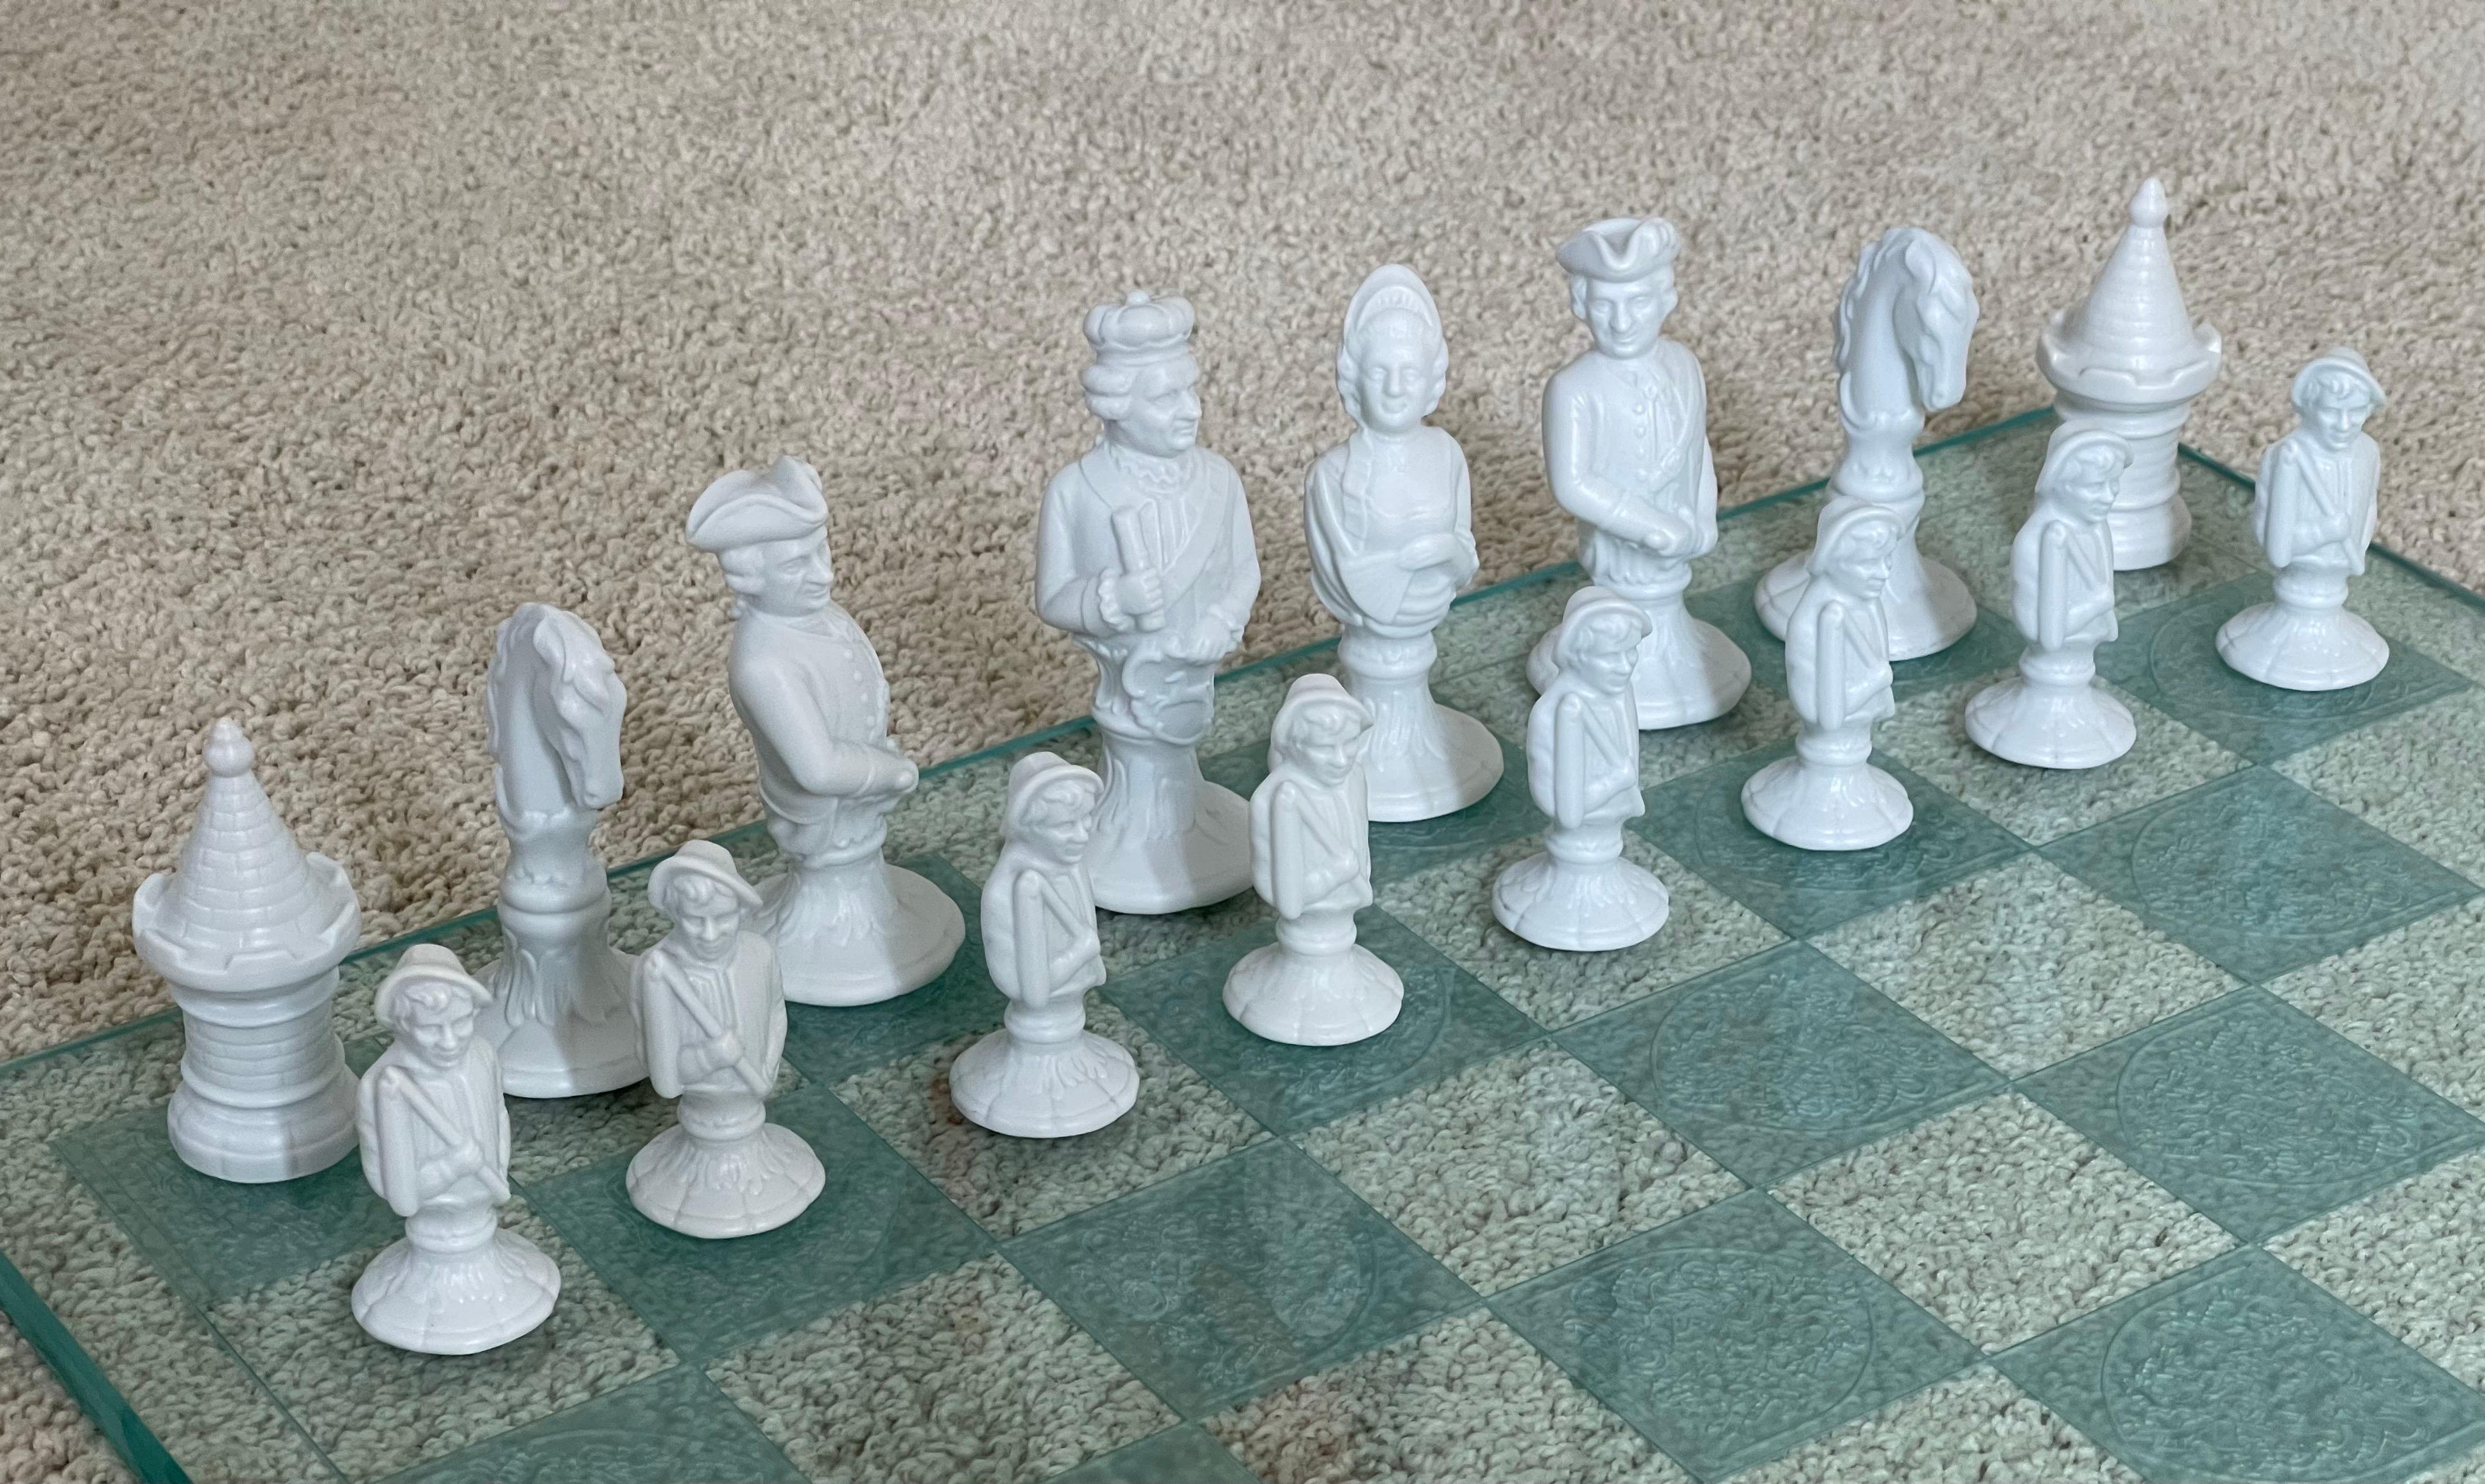 Vintage Bisque Porcelain Chess Set with Etched Glass Board by Furstenberg  In Good Condition For Sale In San Diego, CA